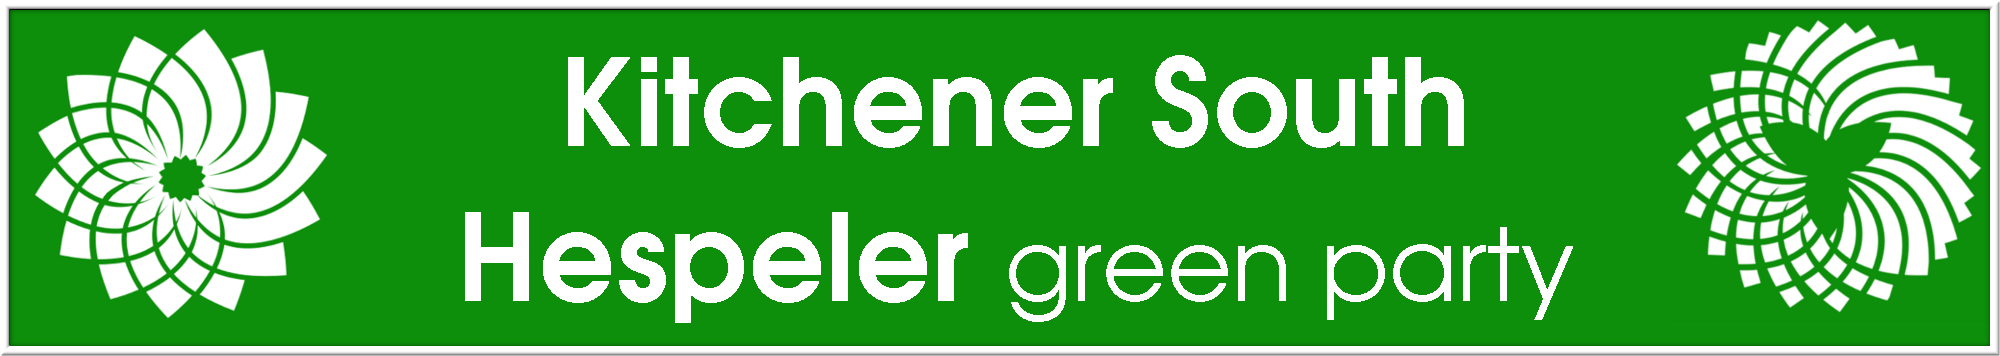 KitchenerSouth-HespelerGreenParty